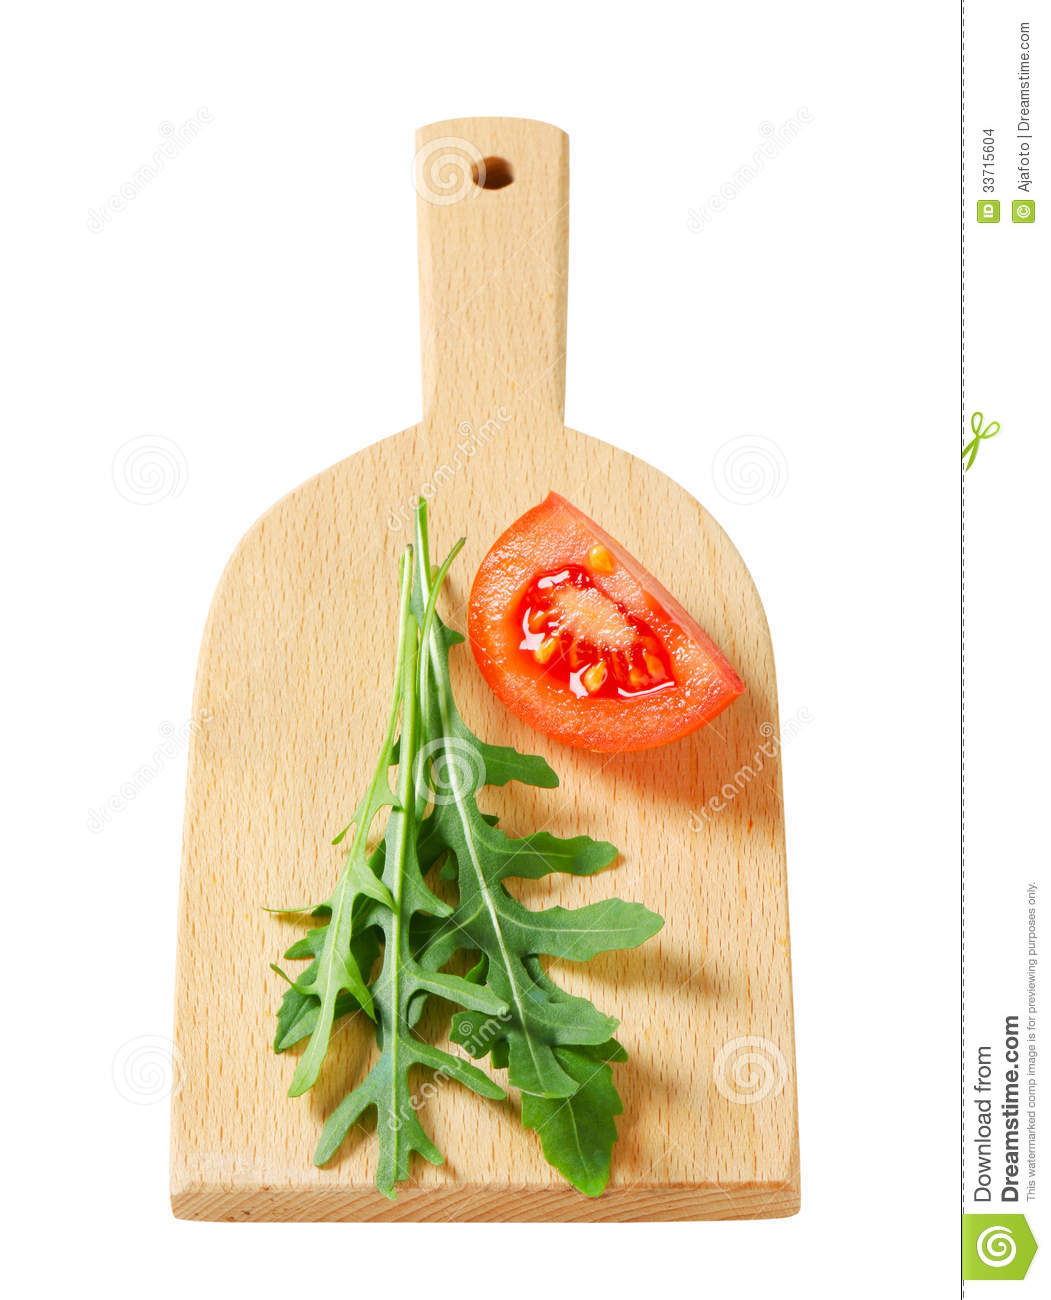 Rocket Leaves On Cutting Board Stock Images   Image  33715604